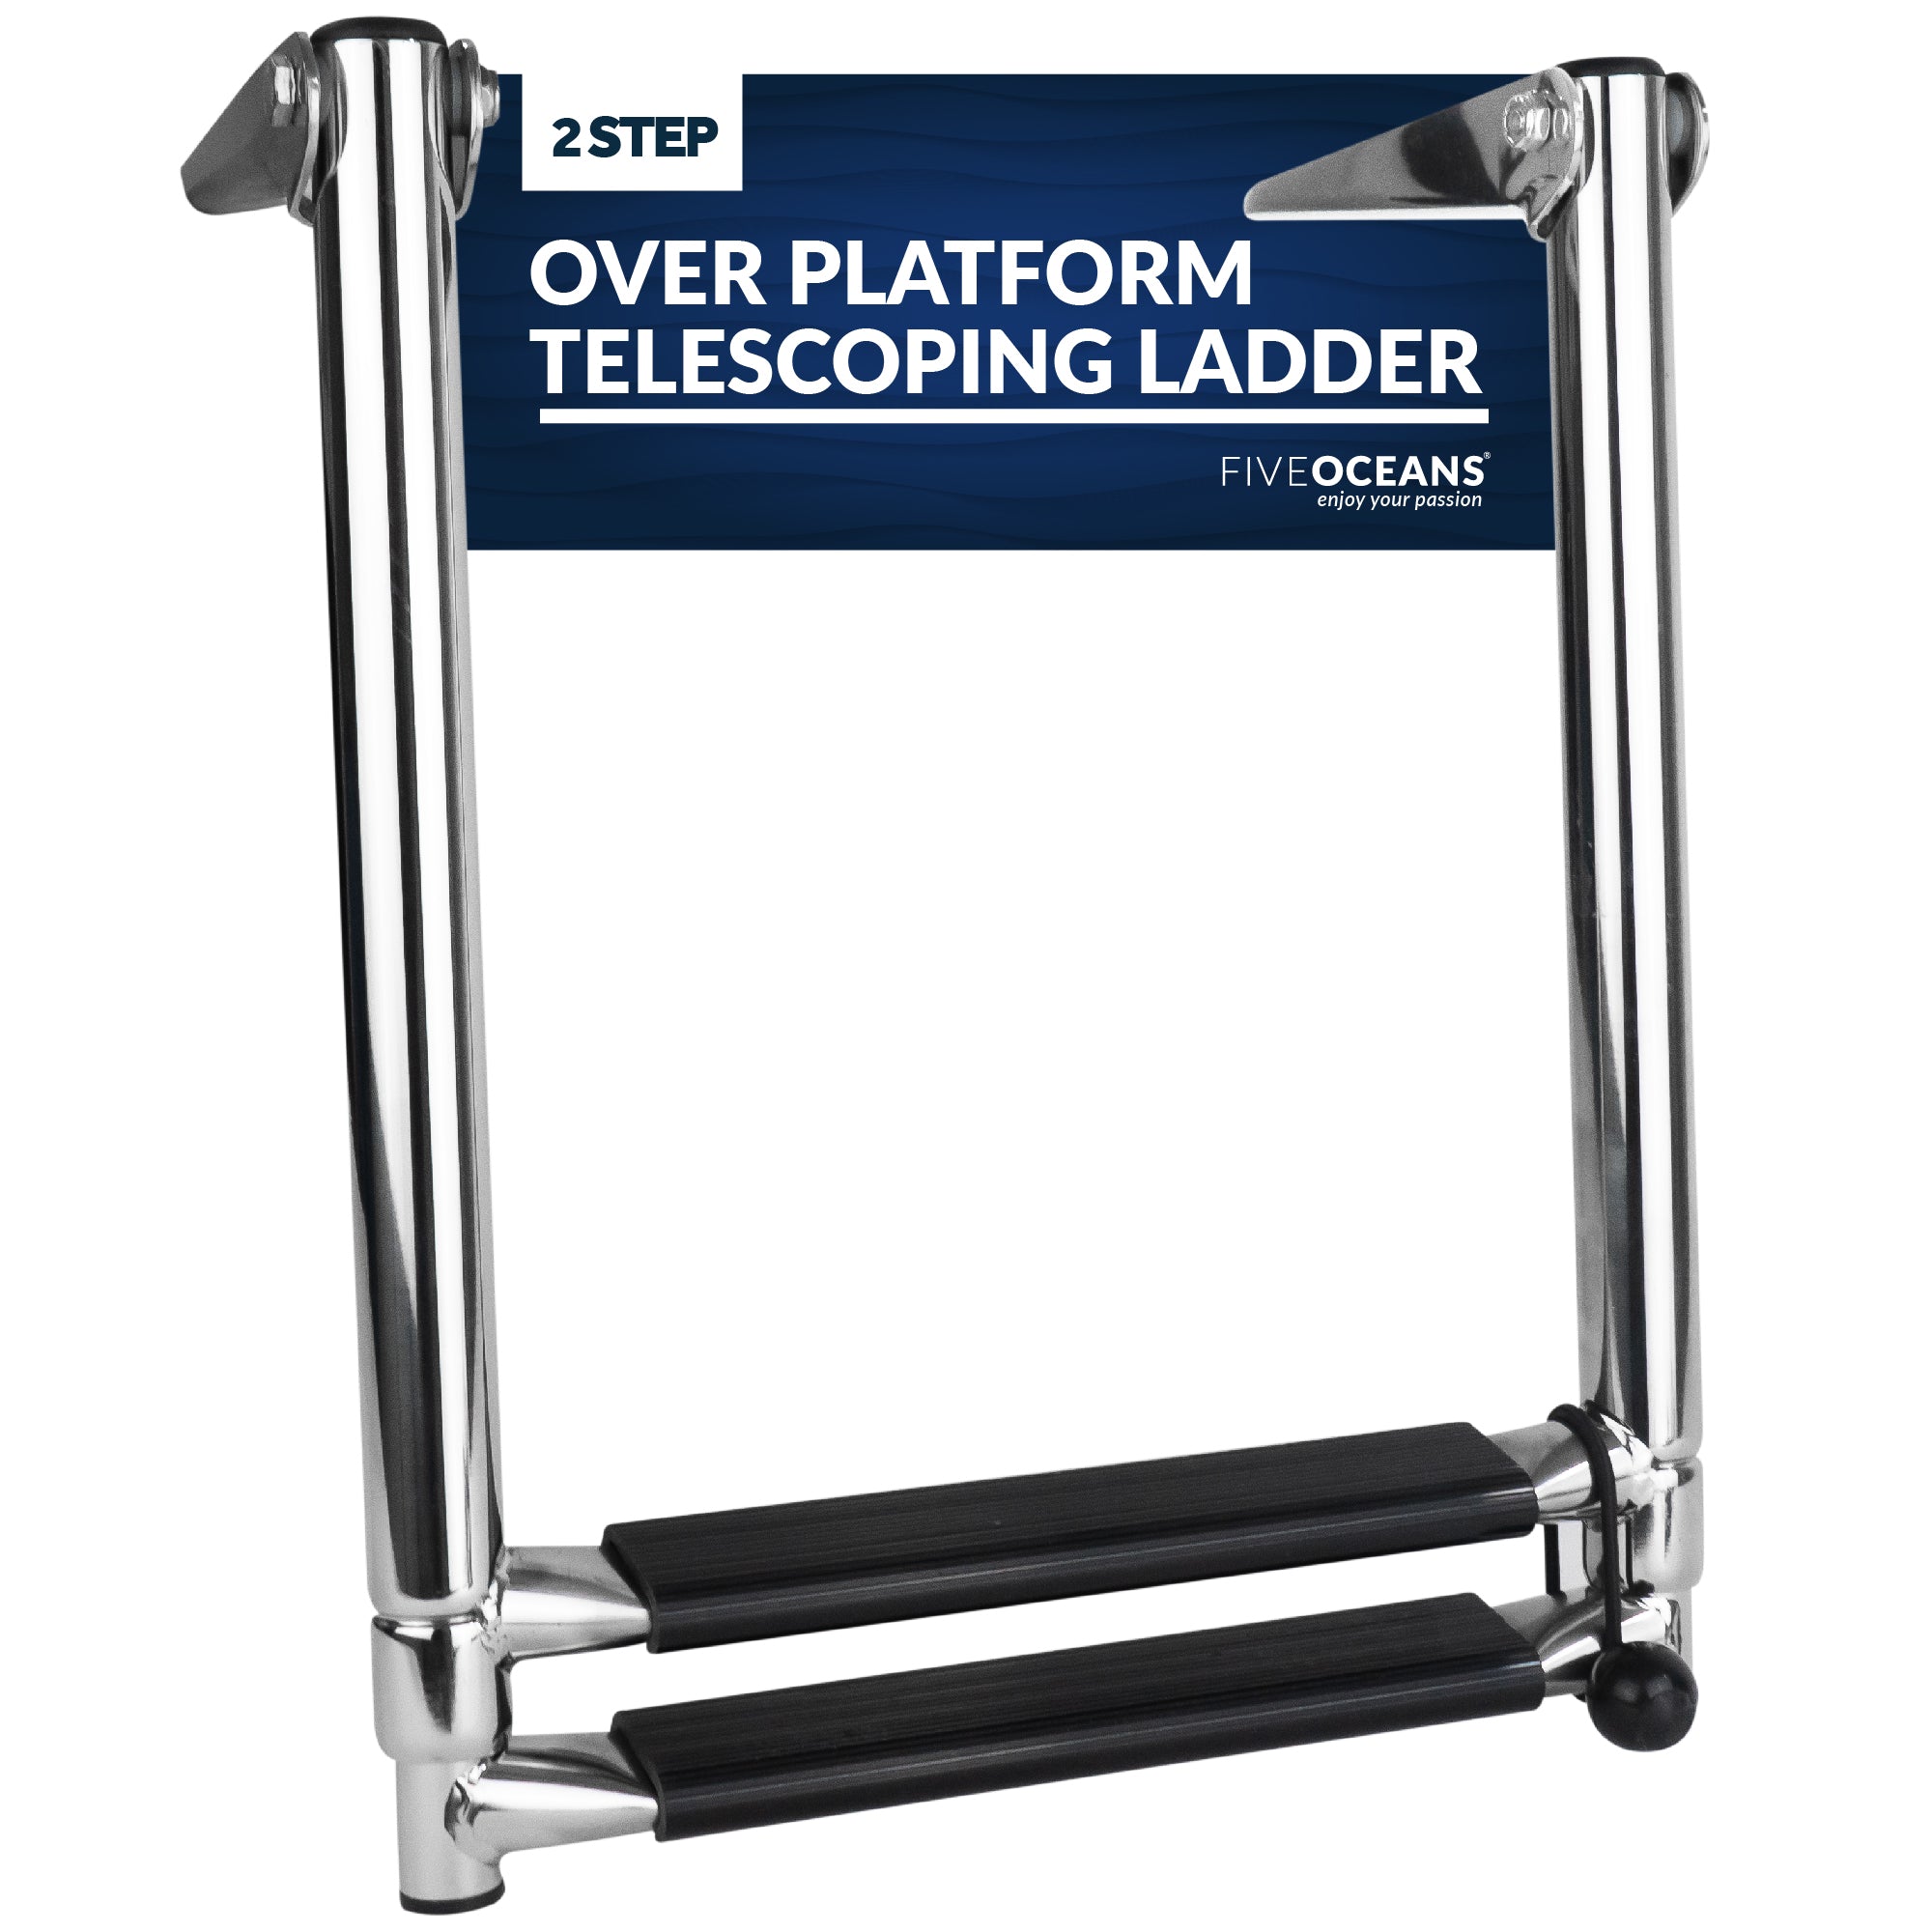 2 Step Boat Over Platform Telescoping Ladder, Stainless Steel - FO4501